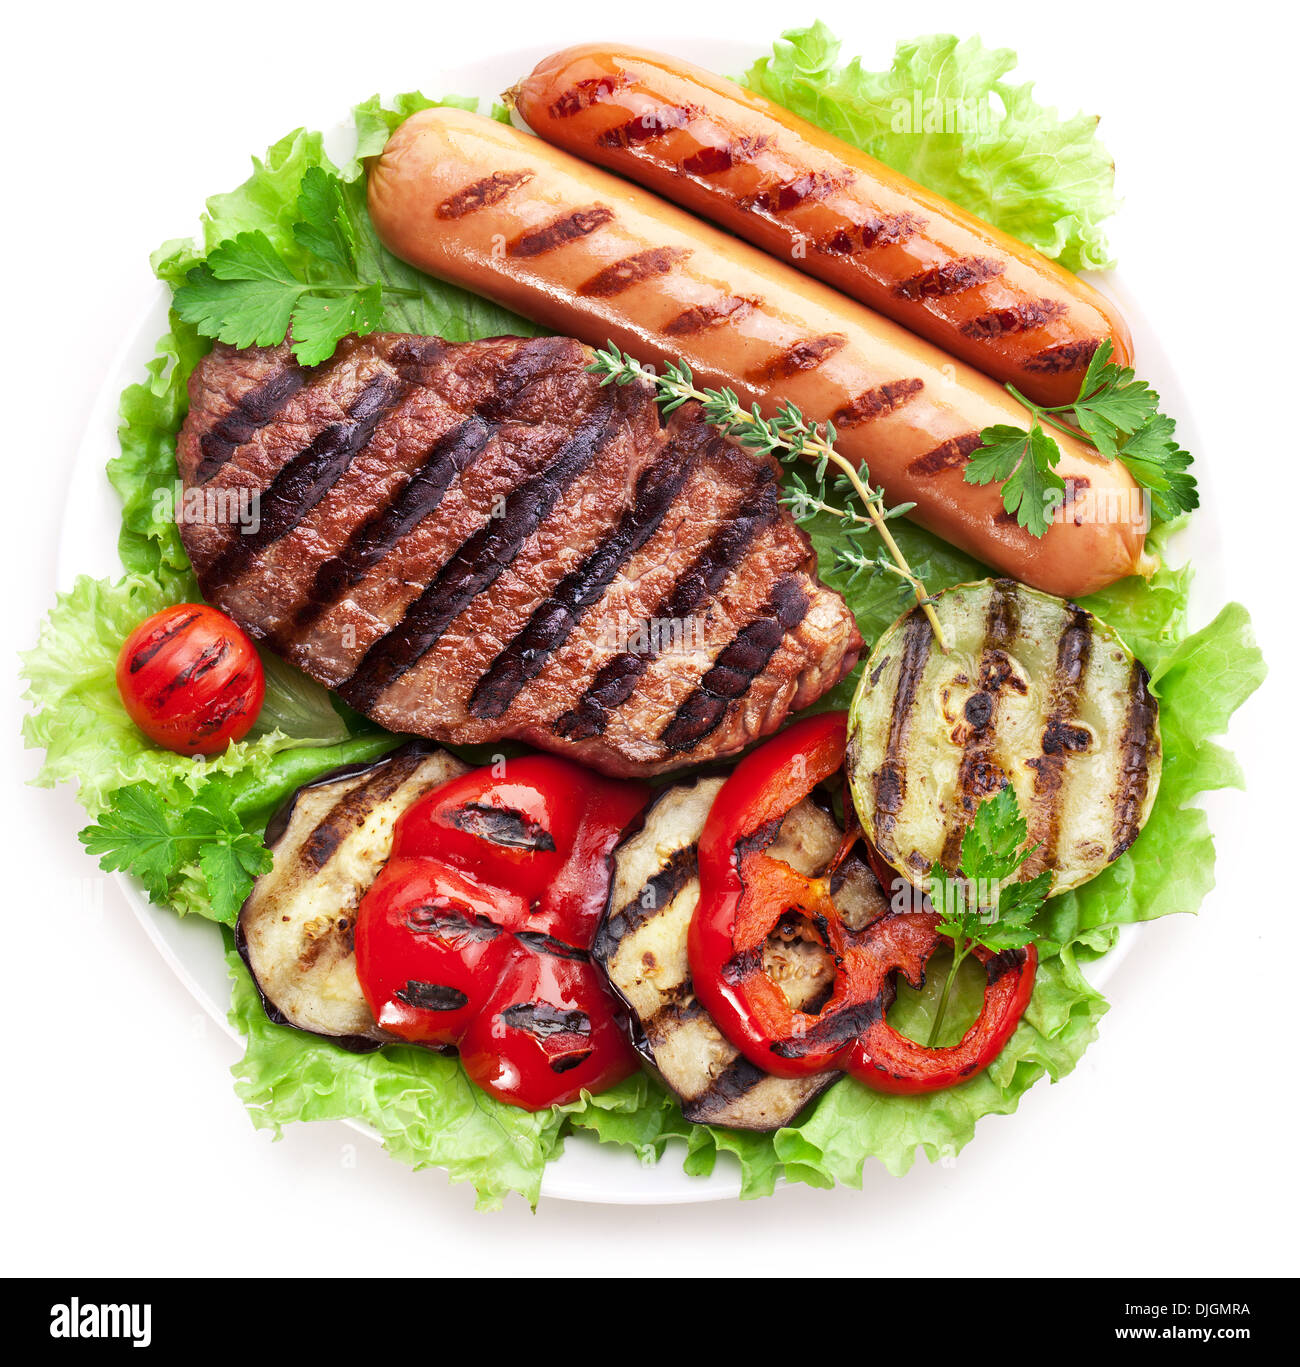 Grilled steak,sausages and vegetables over lettuce leaves. Stock Photo